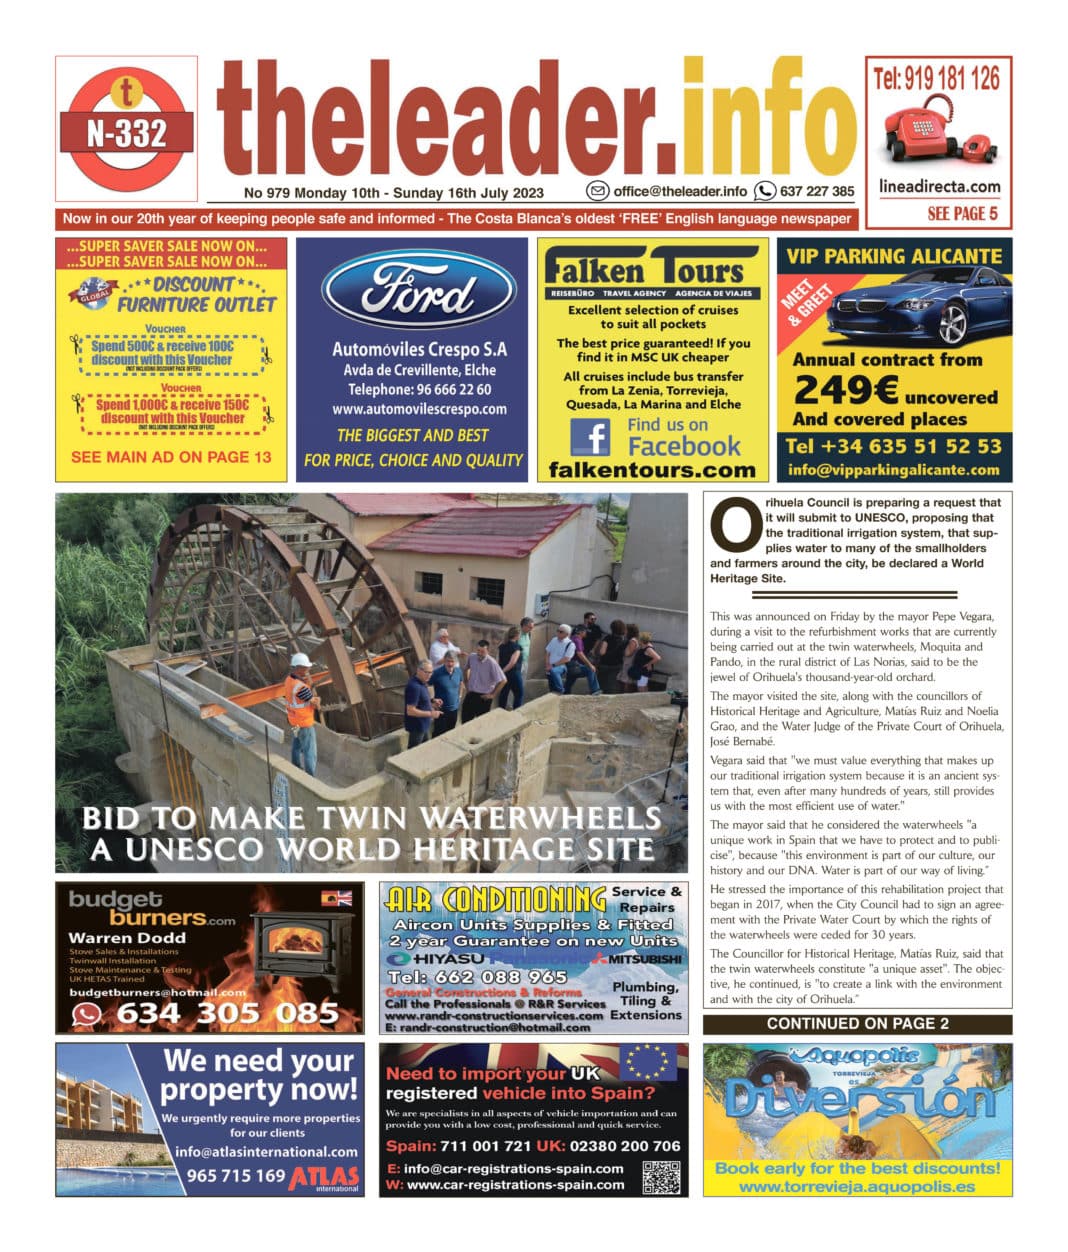 The Leader Newspaper 10 July 23 - Edition 979